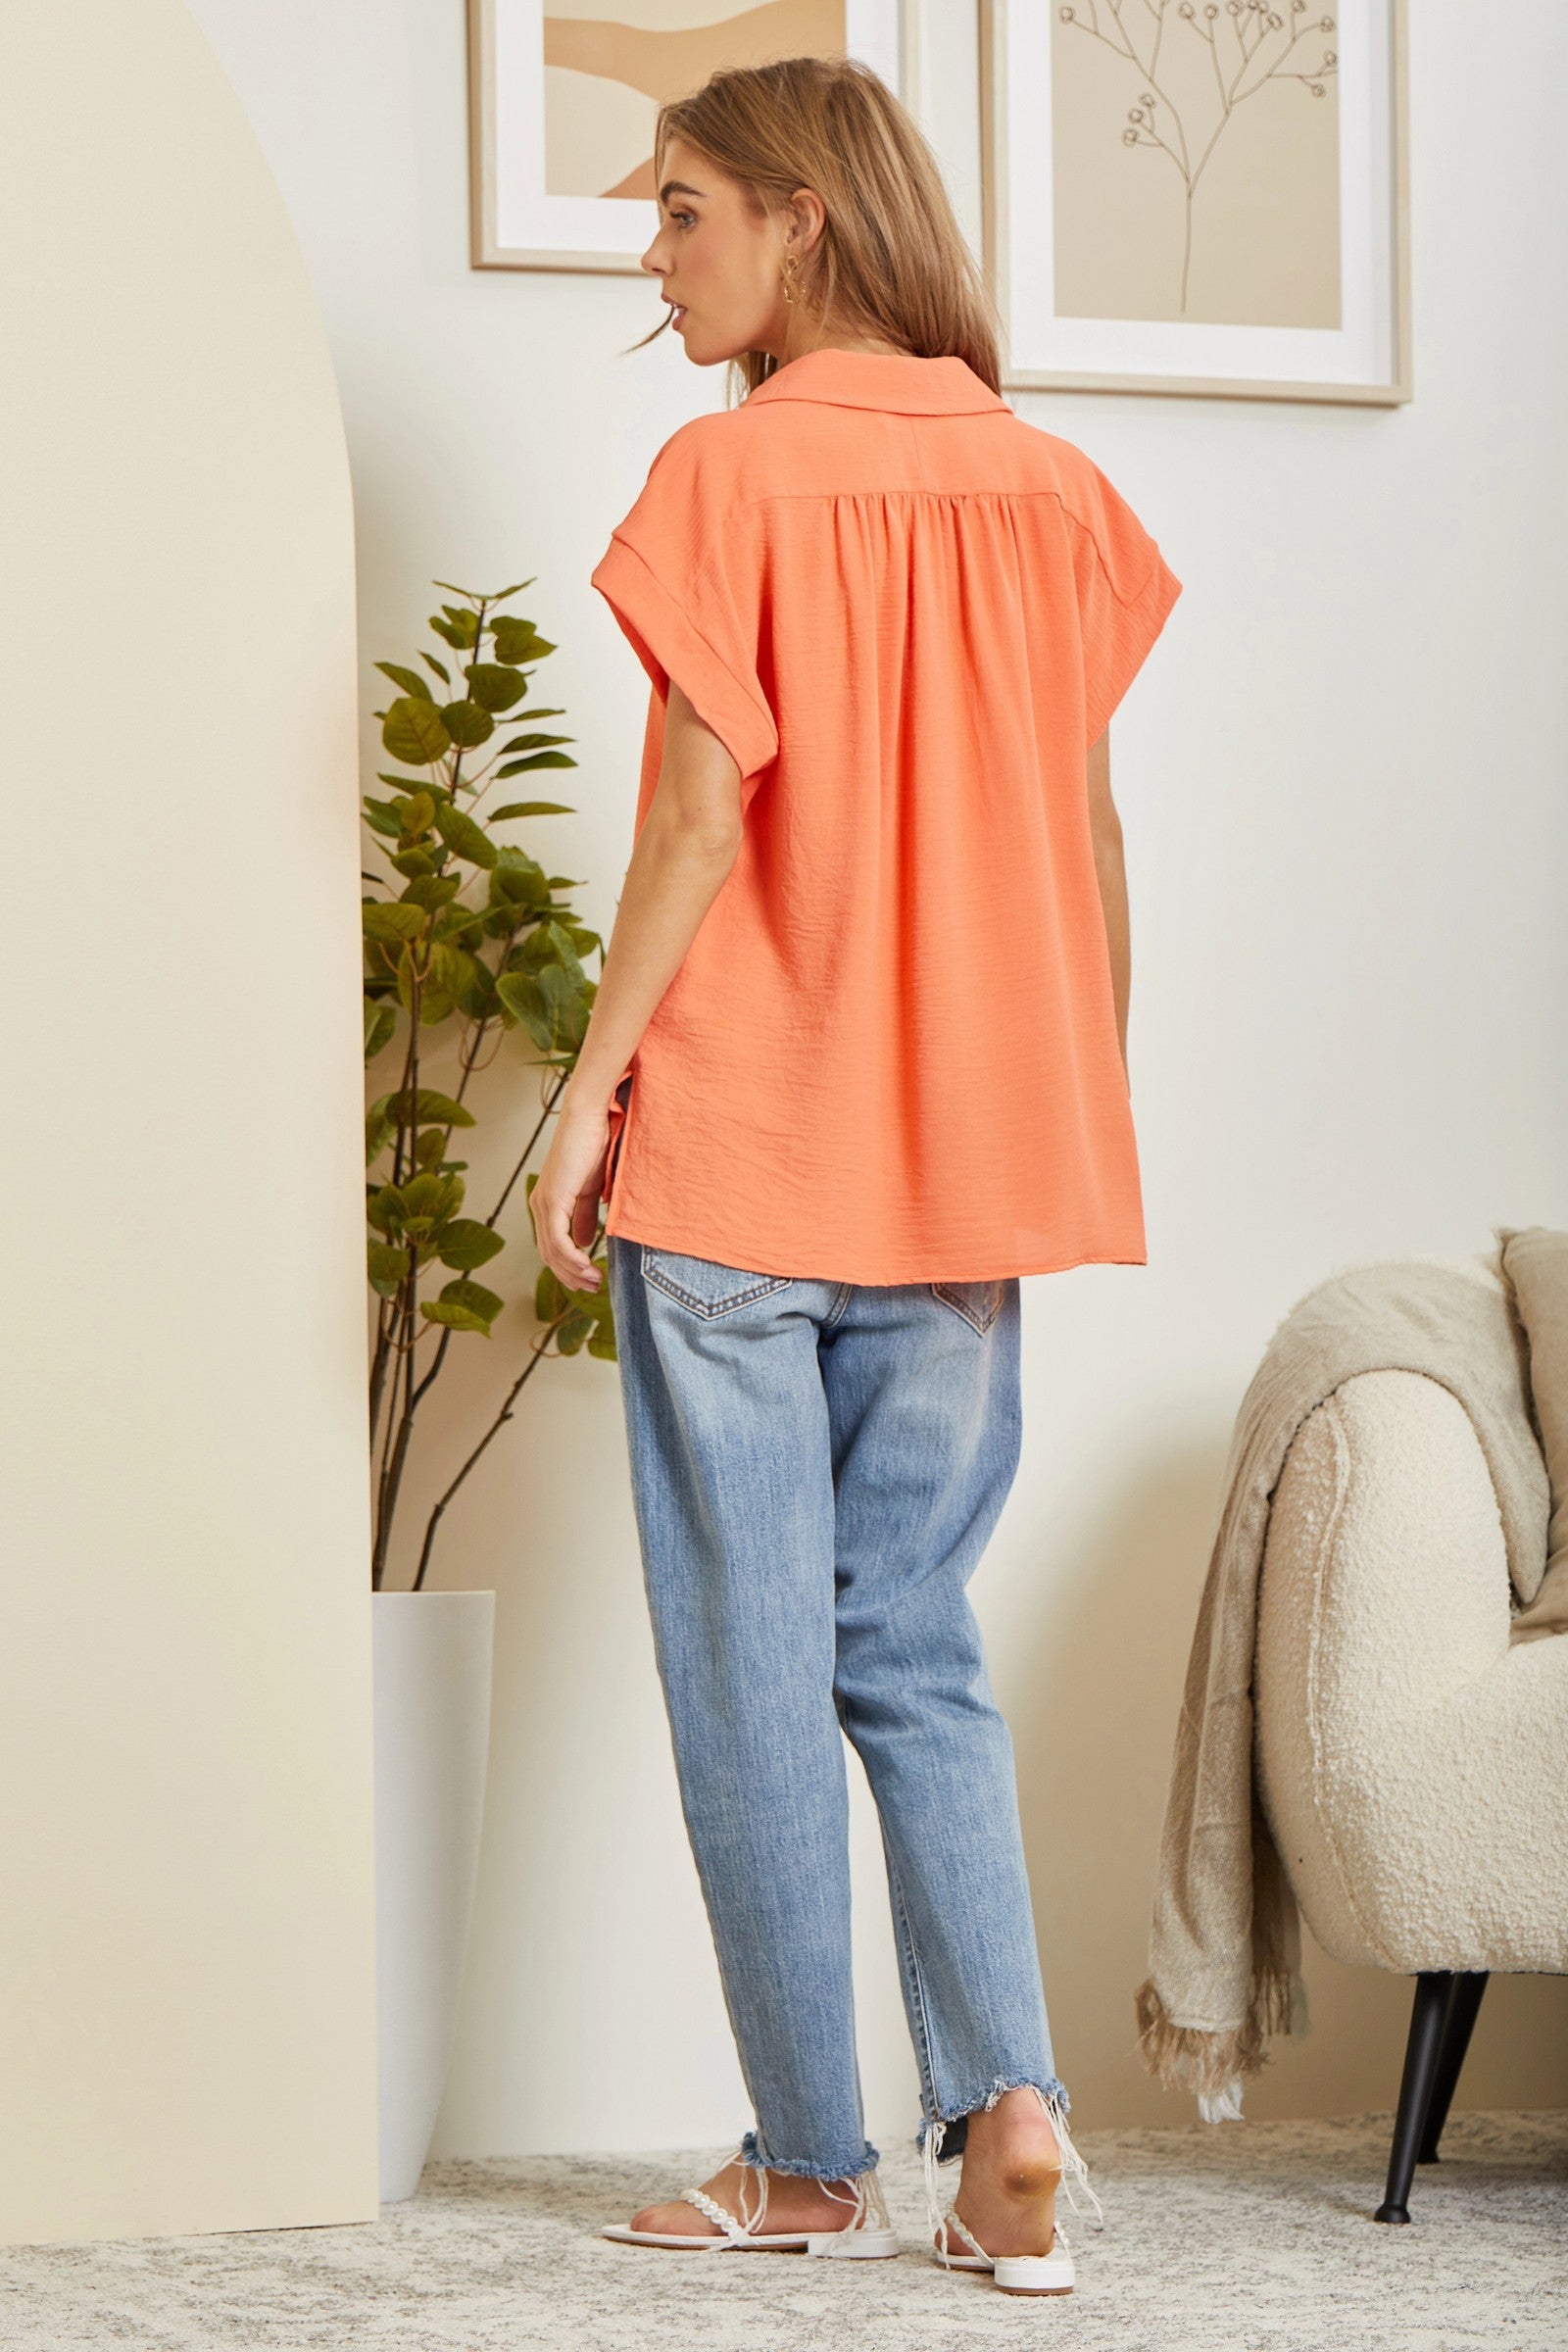 Story Of My Life Blouse - Persimmon